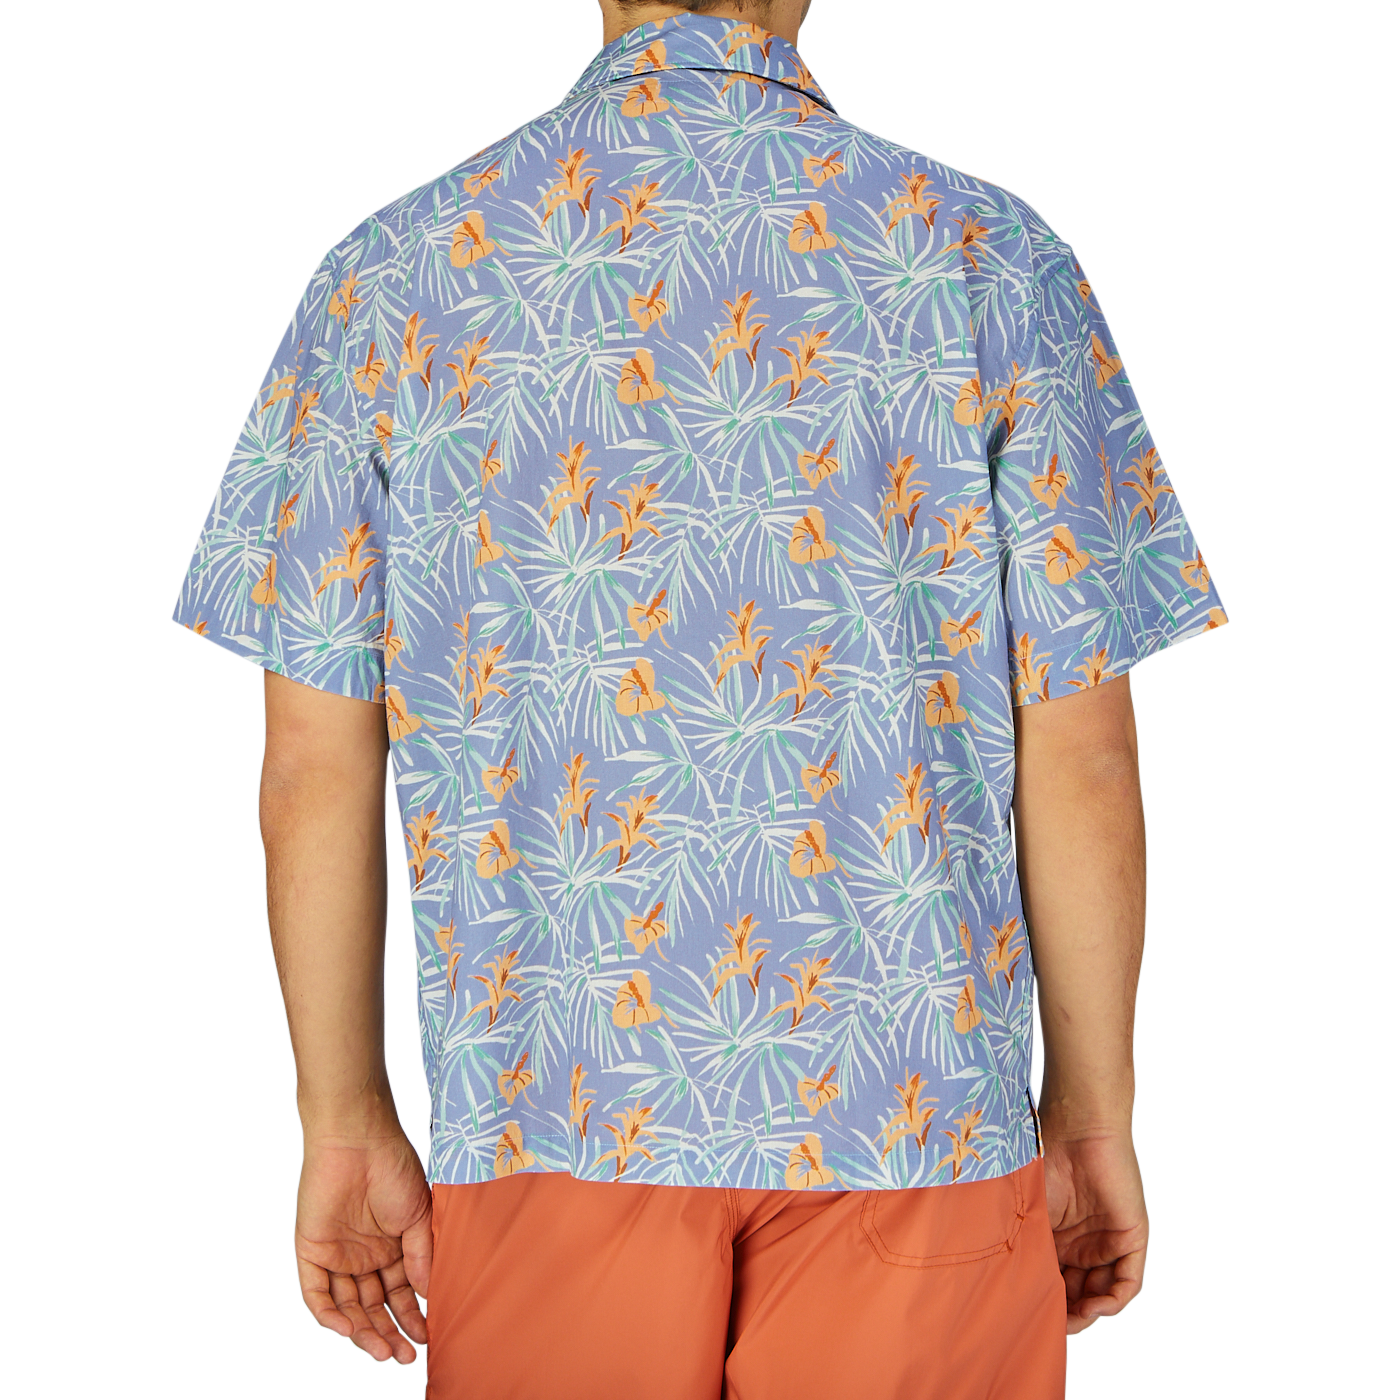 A person viewed from behind wearing an Altea light blue floral printed cotton shirt and orange shorts.